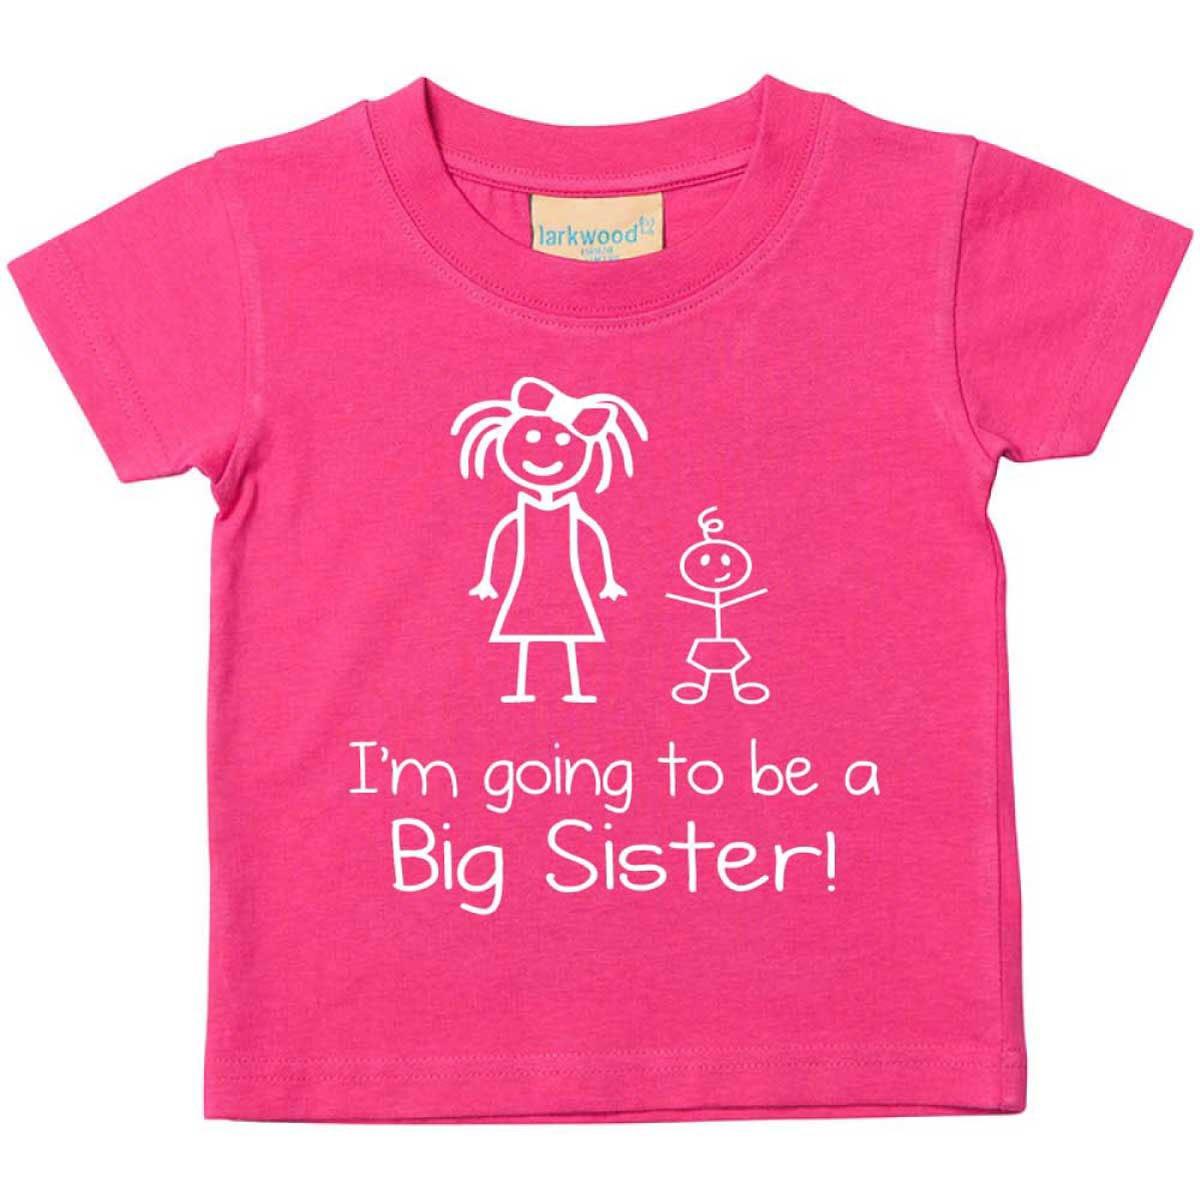 I’m Going To Be a Big Sister Pink Tshirt